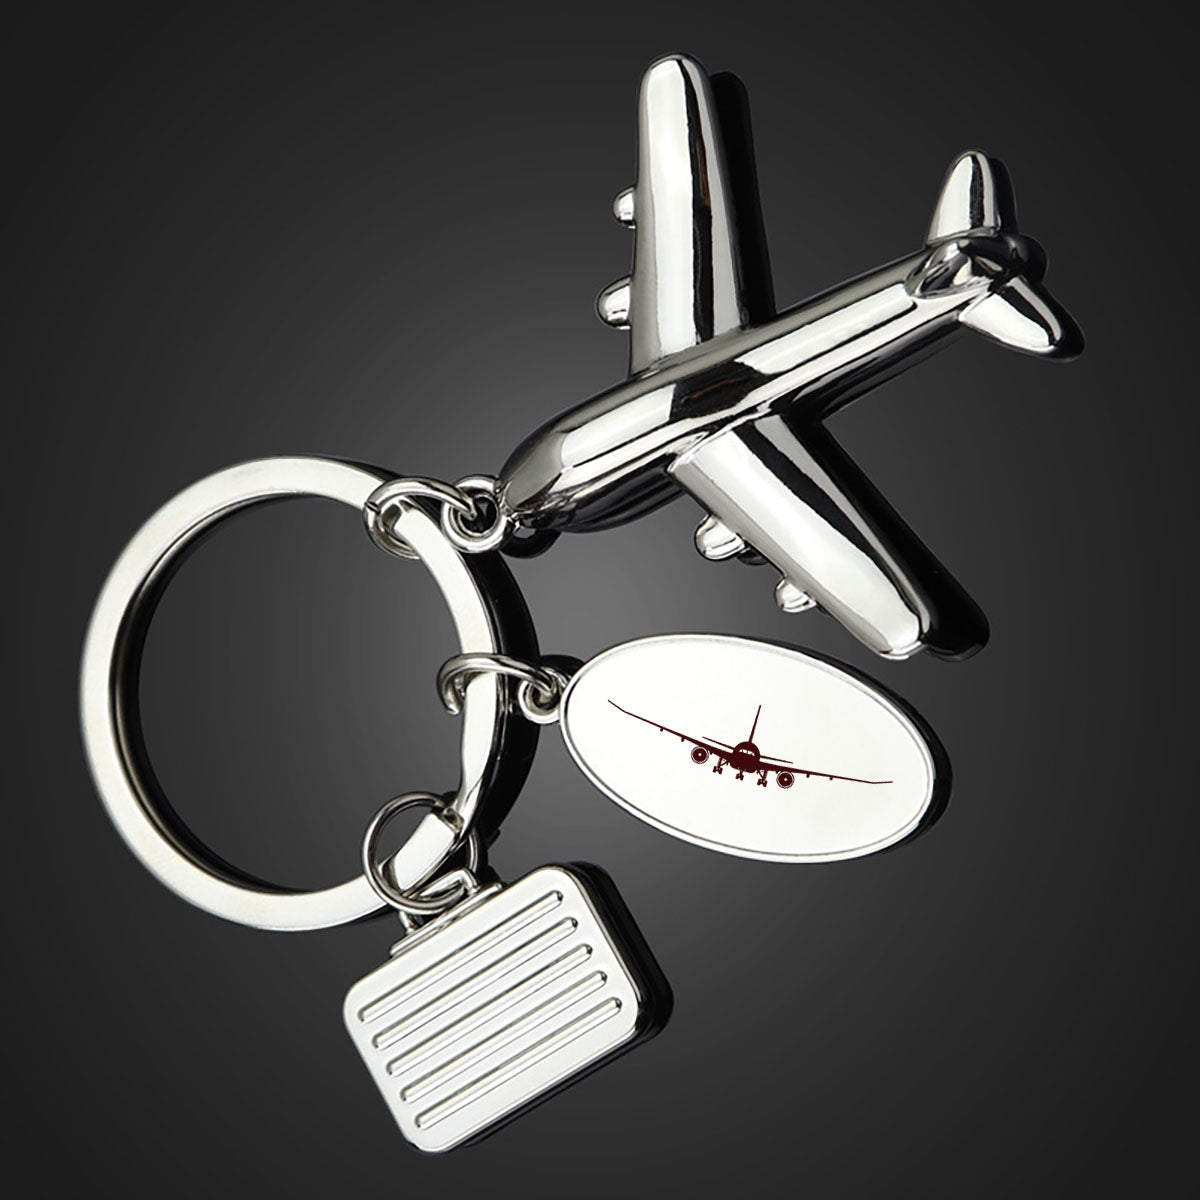 Boeing 787 Silhouette Designed Suitcase Airplane Key Chains